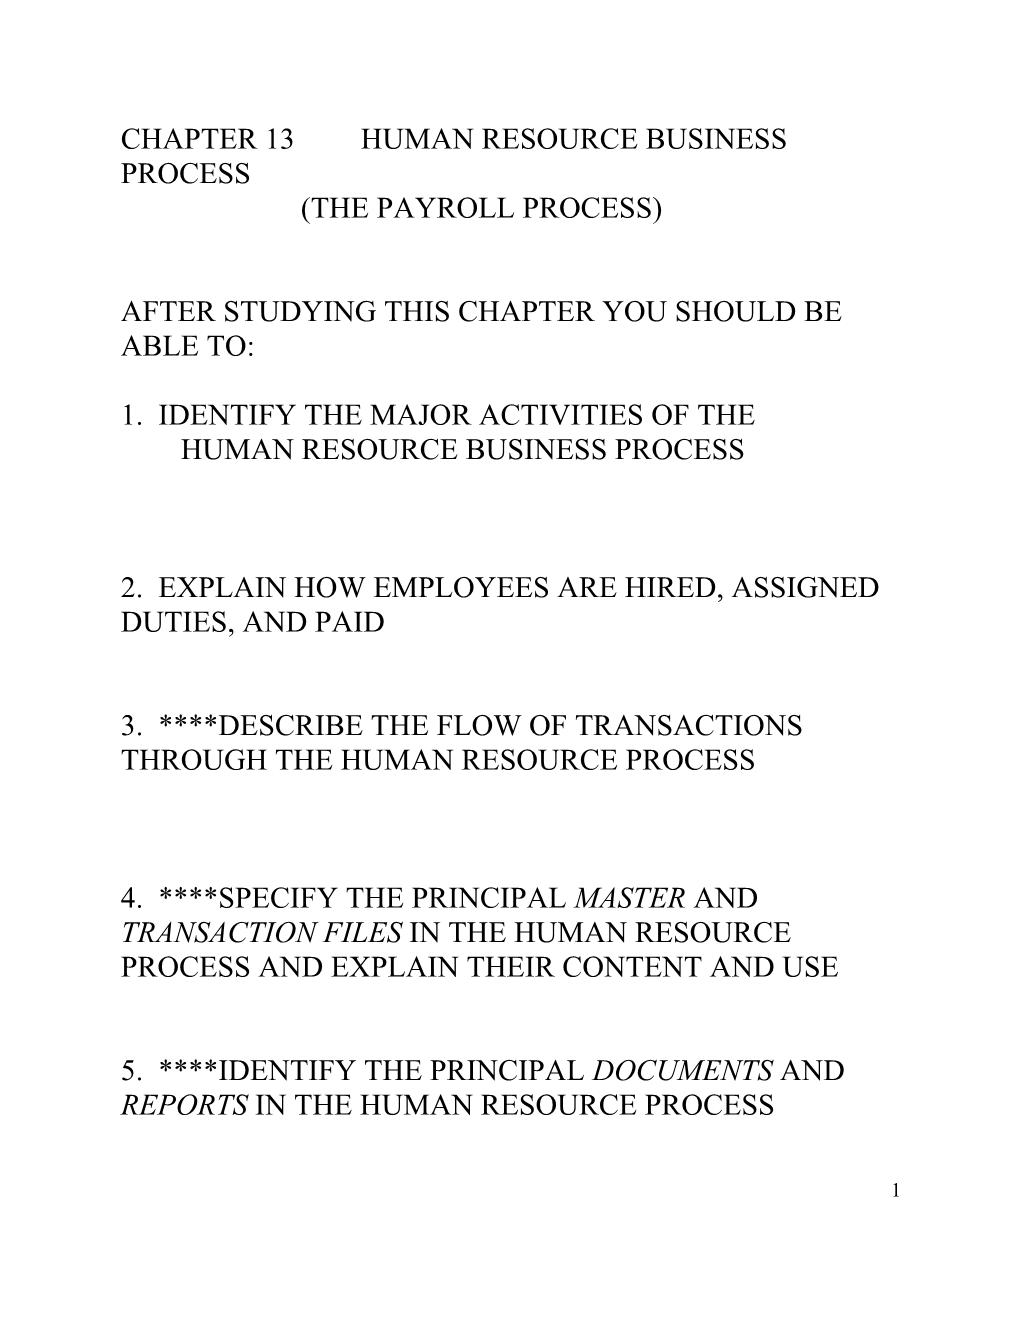 Chapter 13Human Resource Business Process